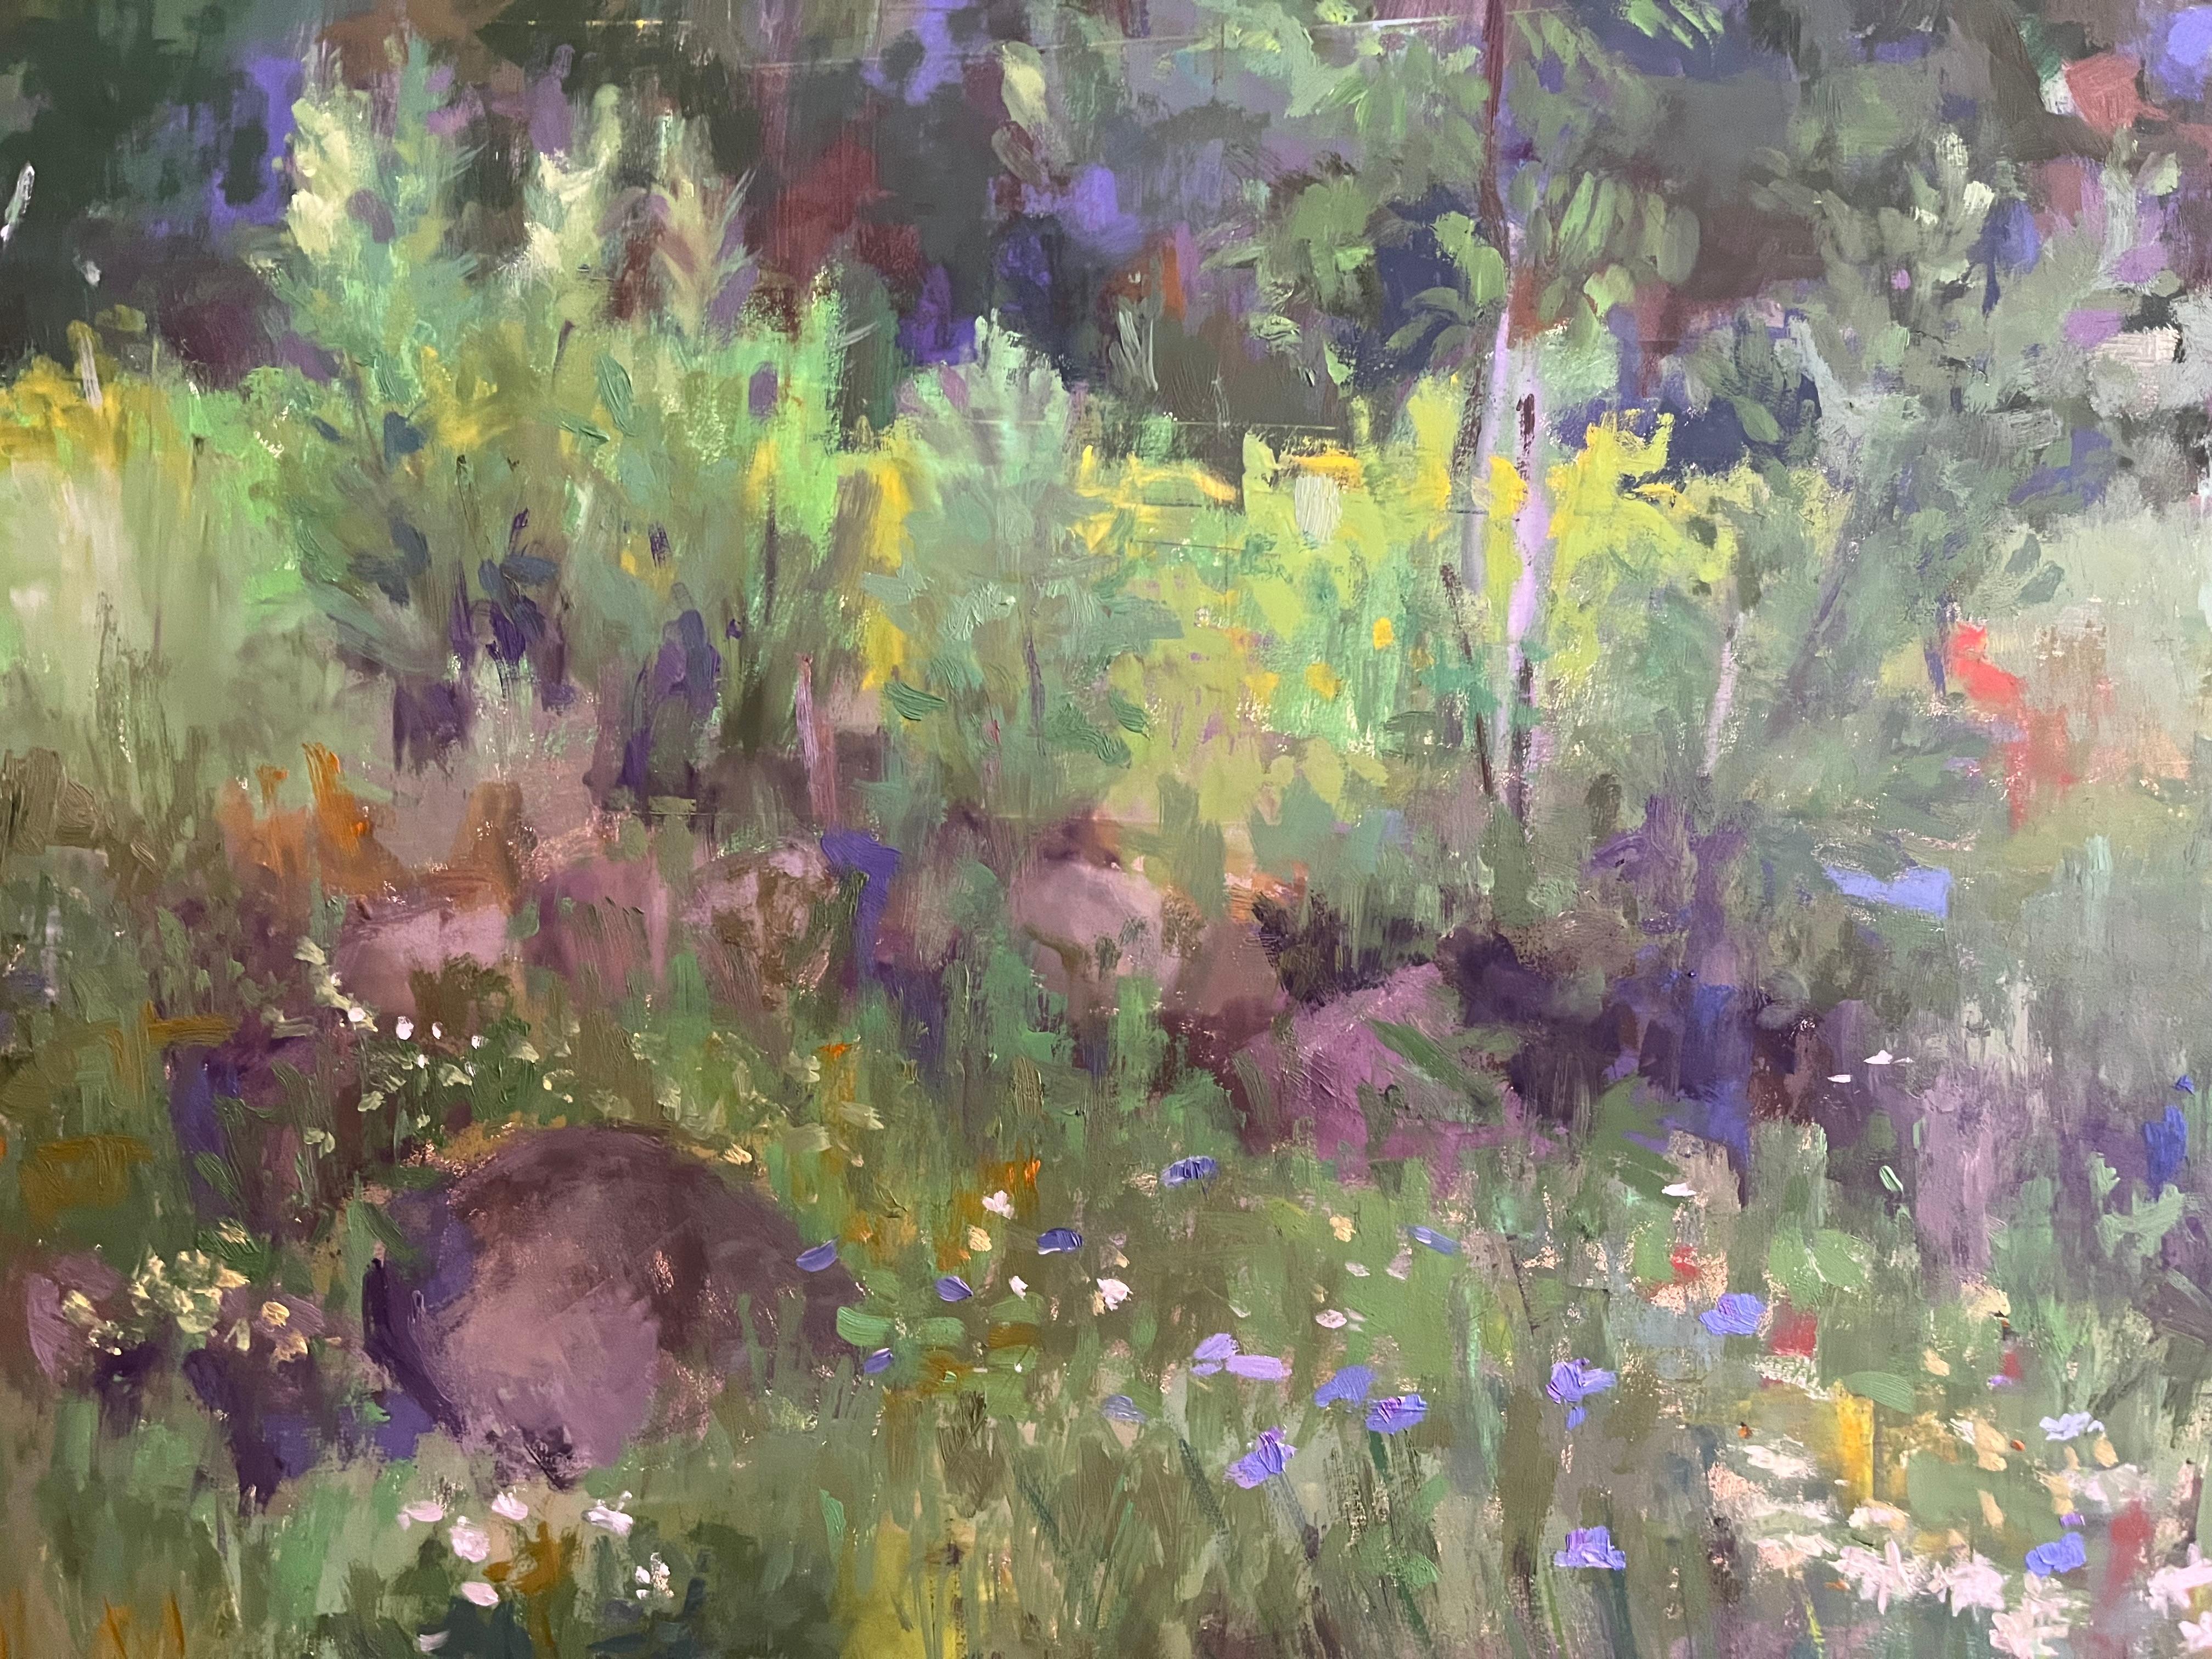 Field of Flowers - Painting by Carole Garland